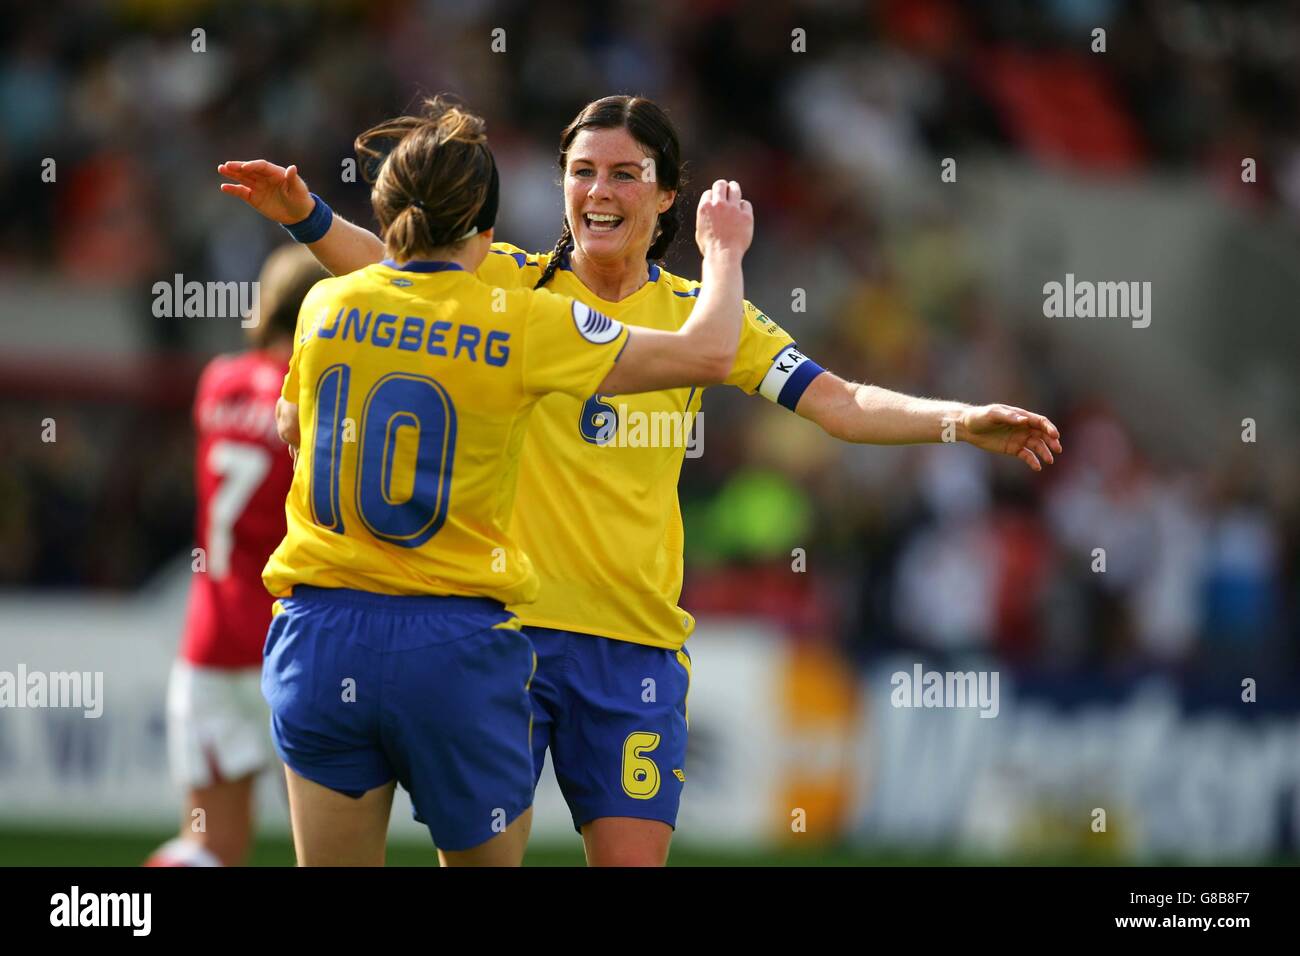 Sweden's Malin Mostrom congratulates Hanna Ljungberg after she scored the opening goal of the tournament Stock Photo